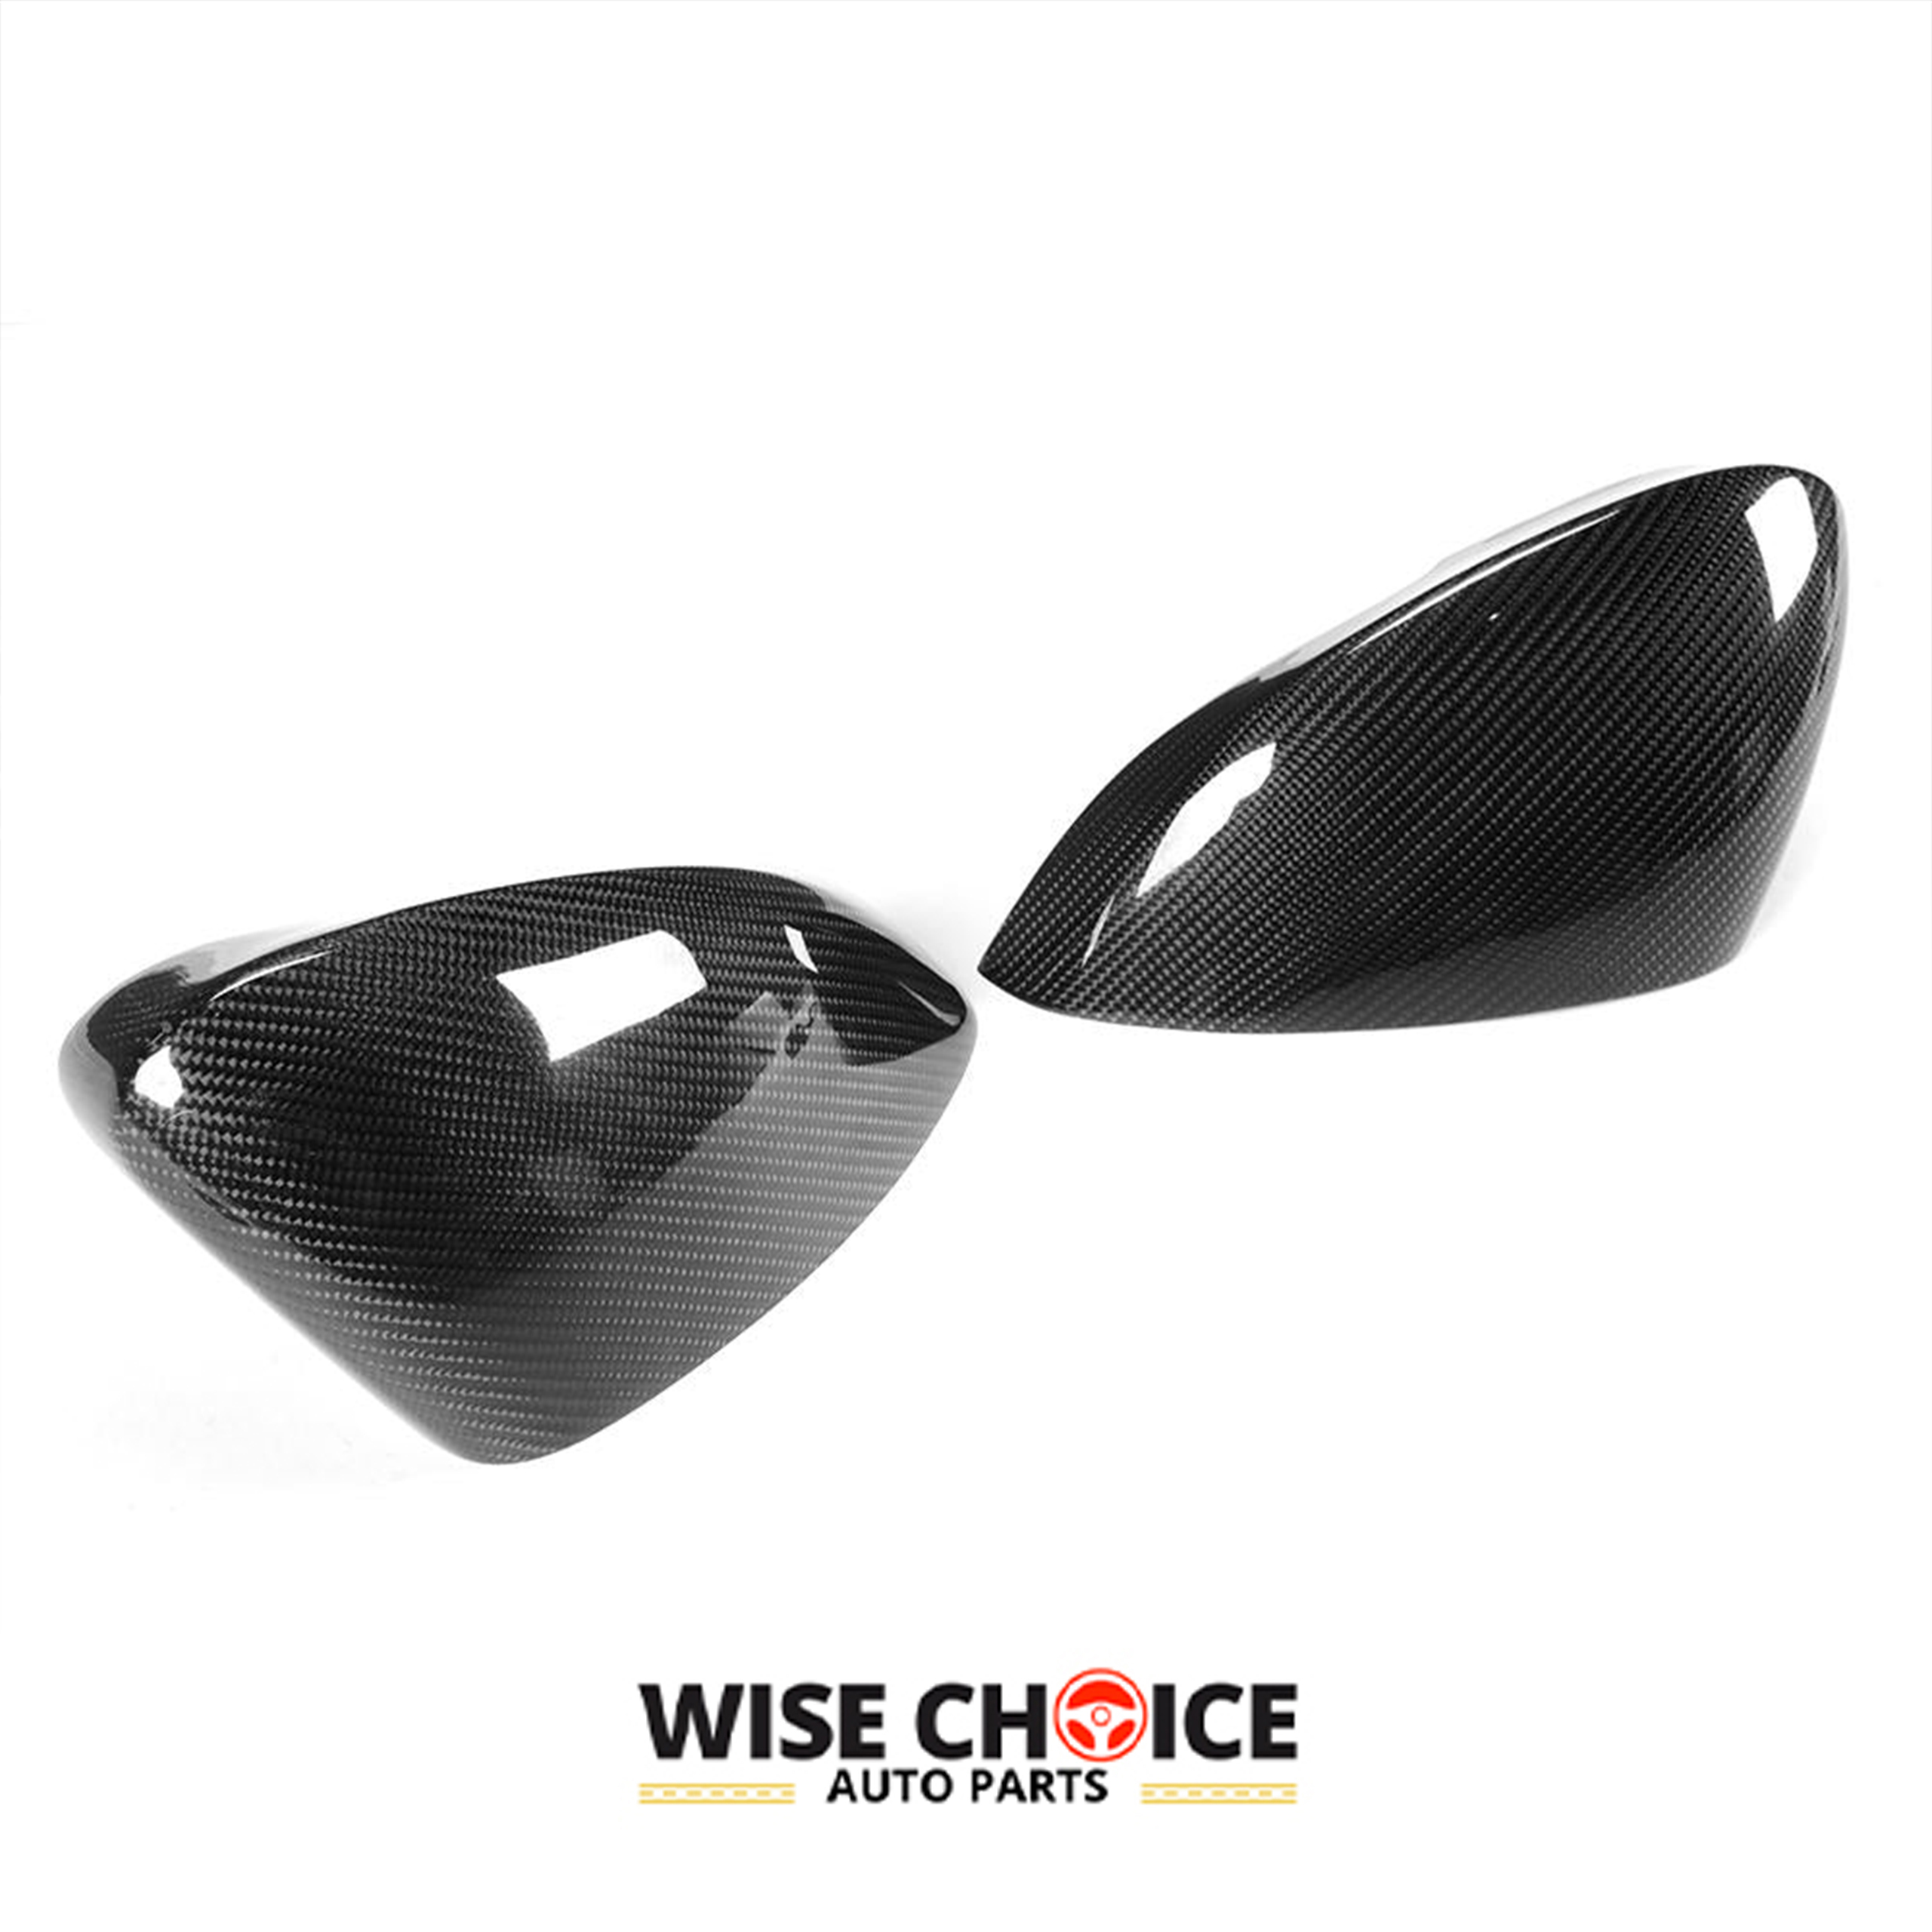 A pair of carbon fiber side mirror covers for Jaguar F-Type Coupe and Convertible 2015-2022 models